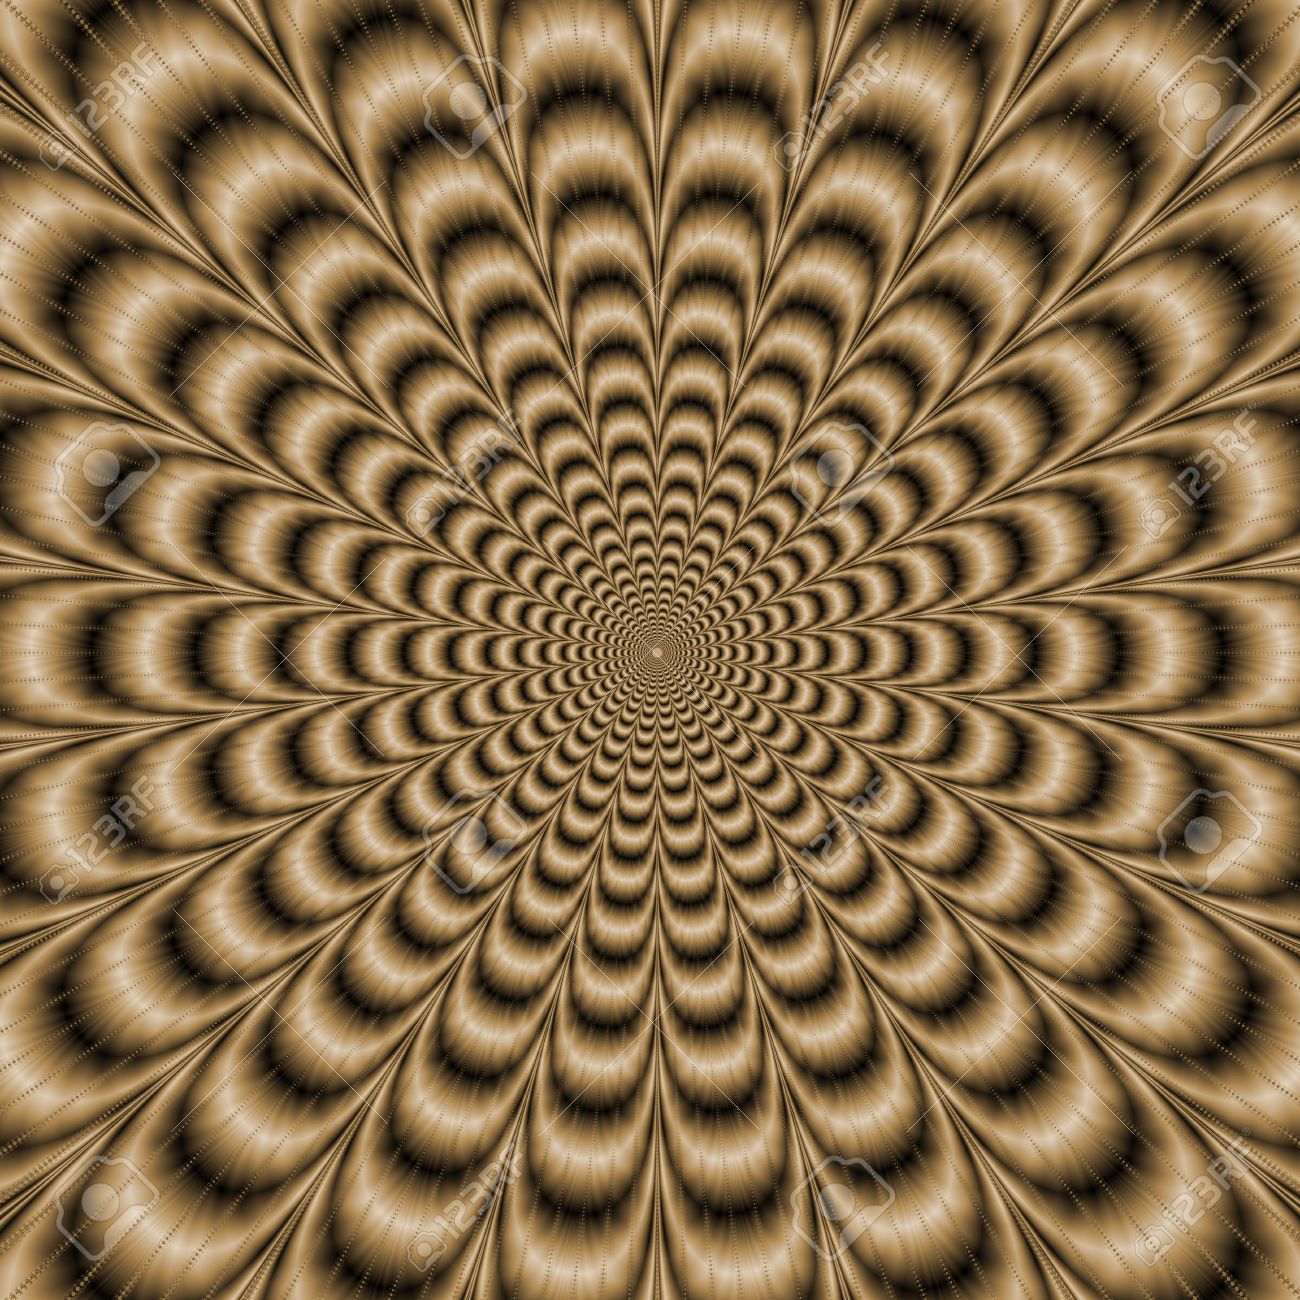 Hypno relax images